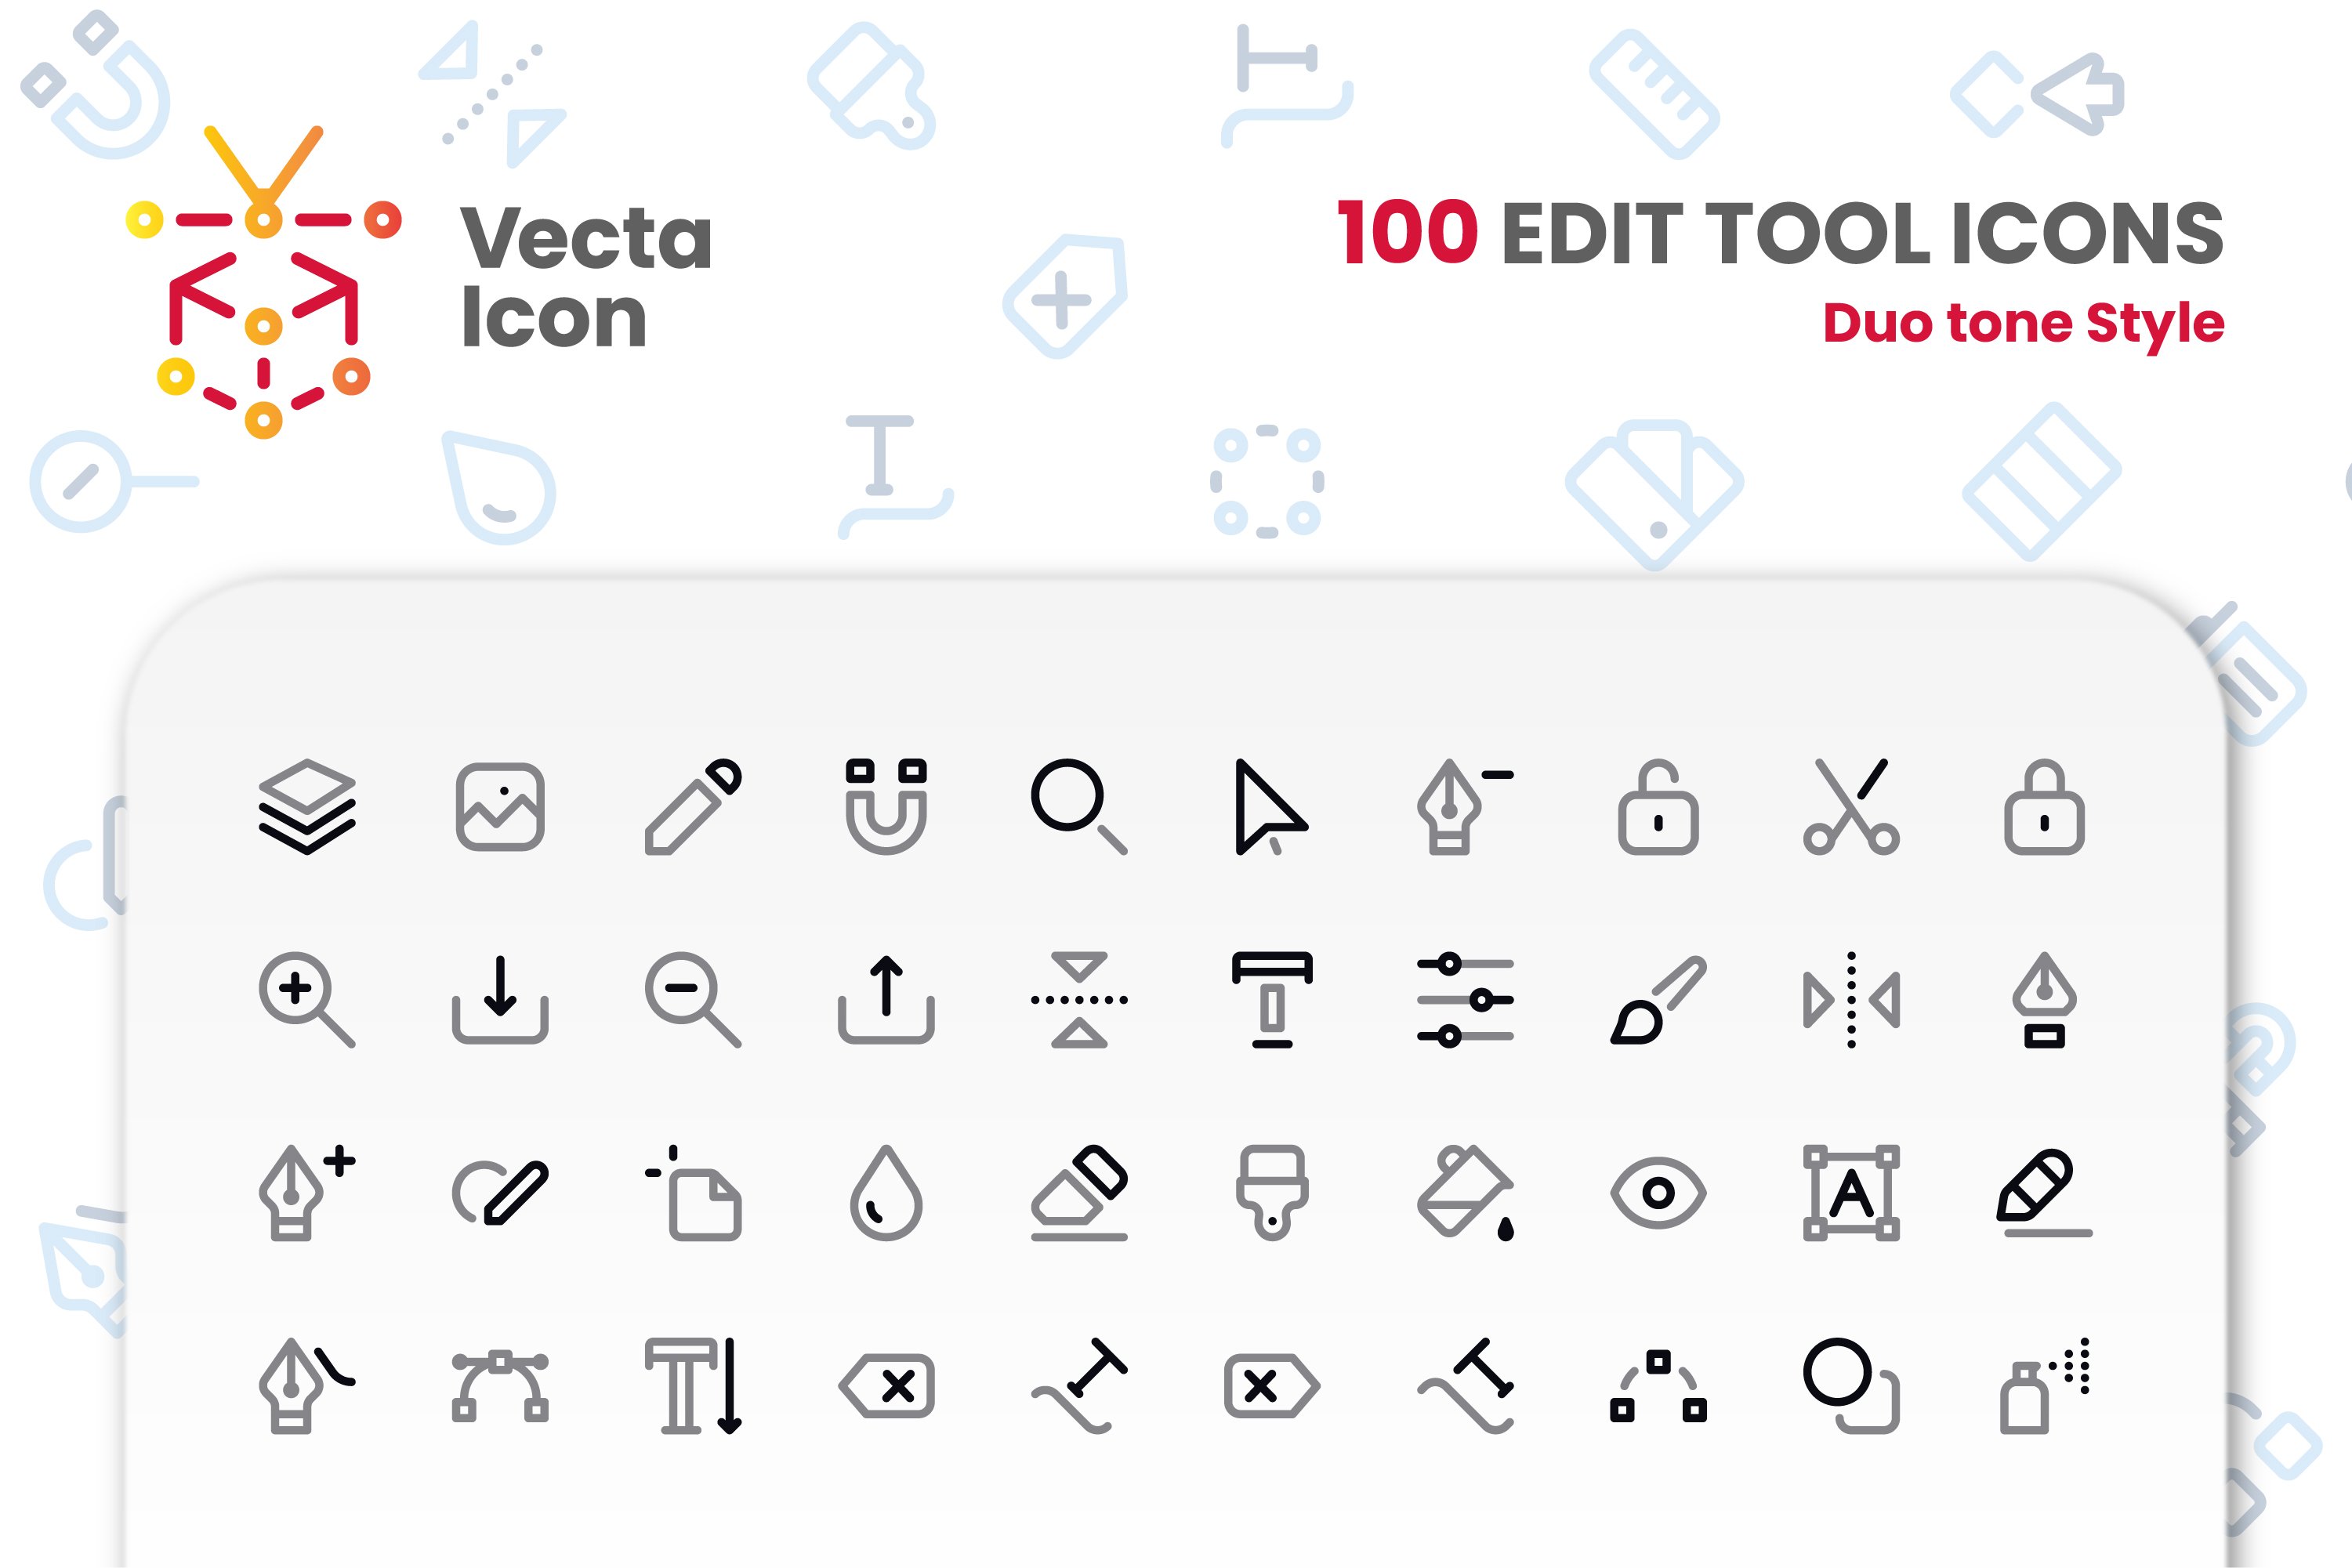 Edit Tool Icon Pack cover image.